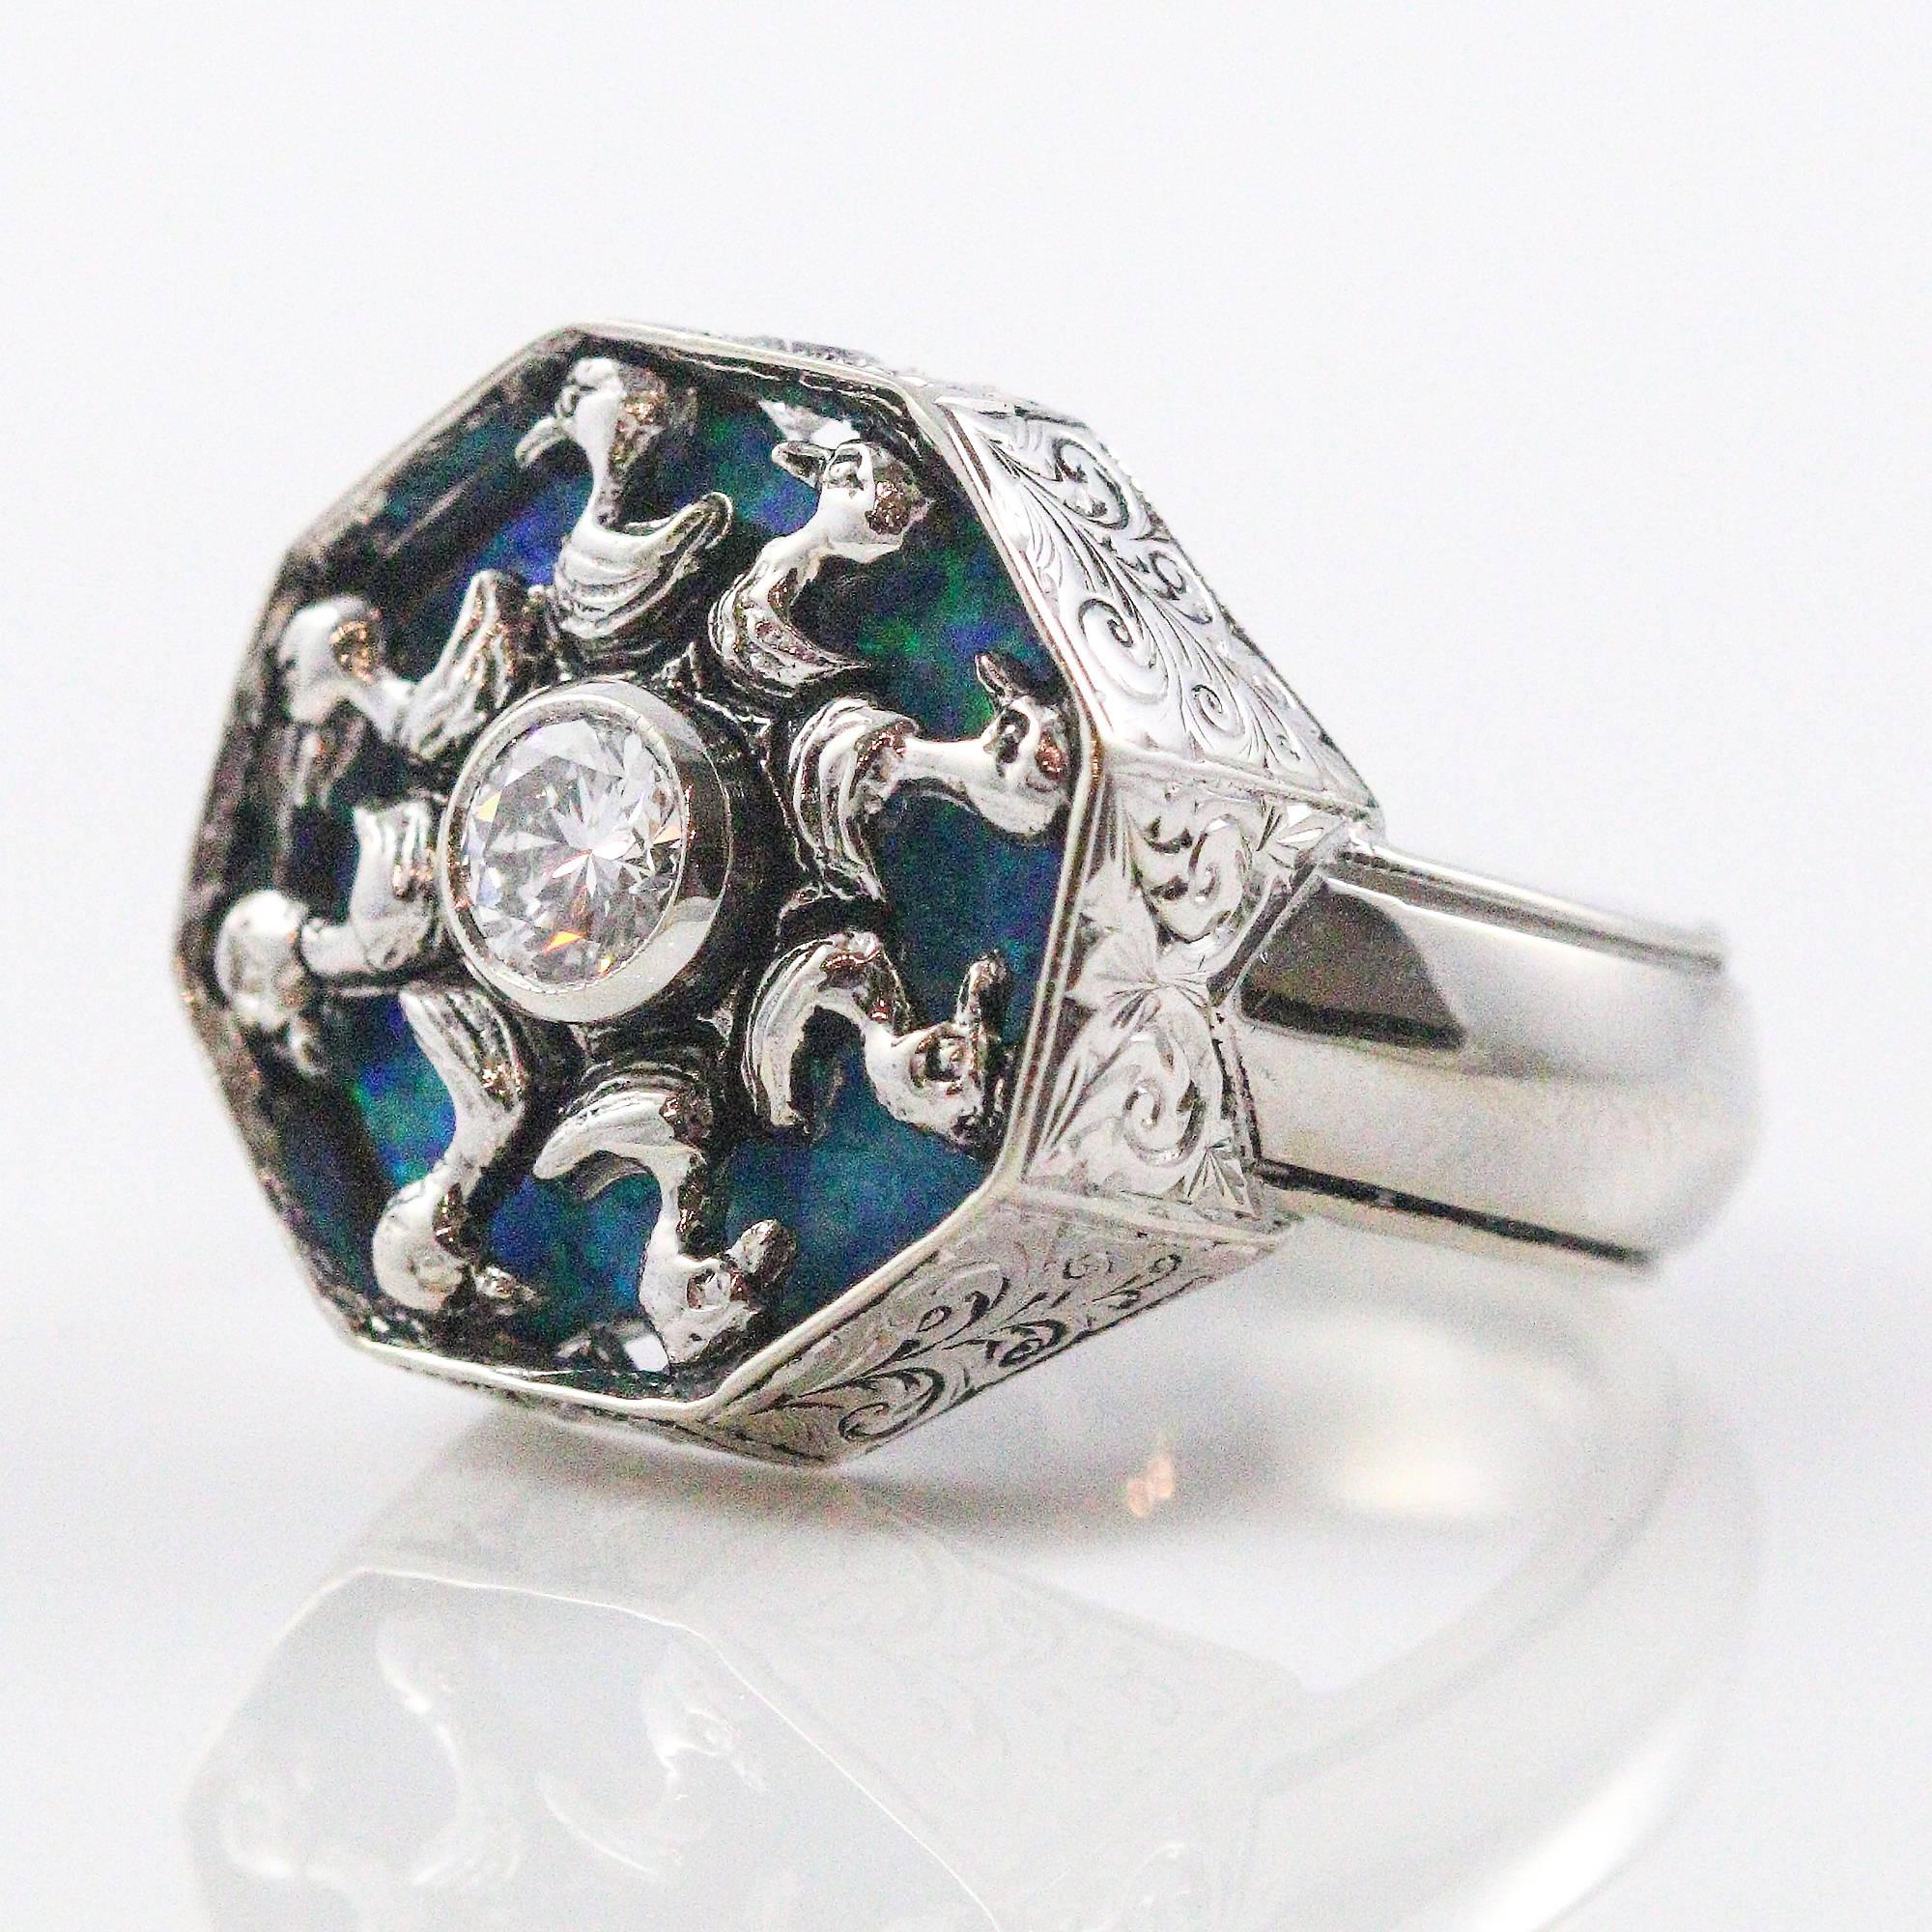 Modern 14 Karat White Gold and Diamond Ring with Opal Backing and Duck Design